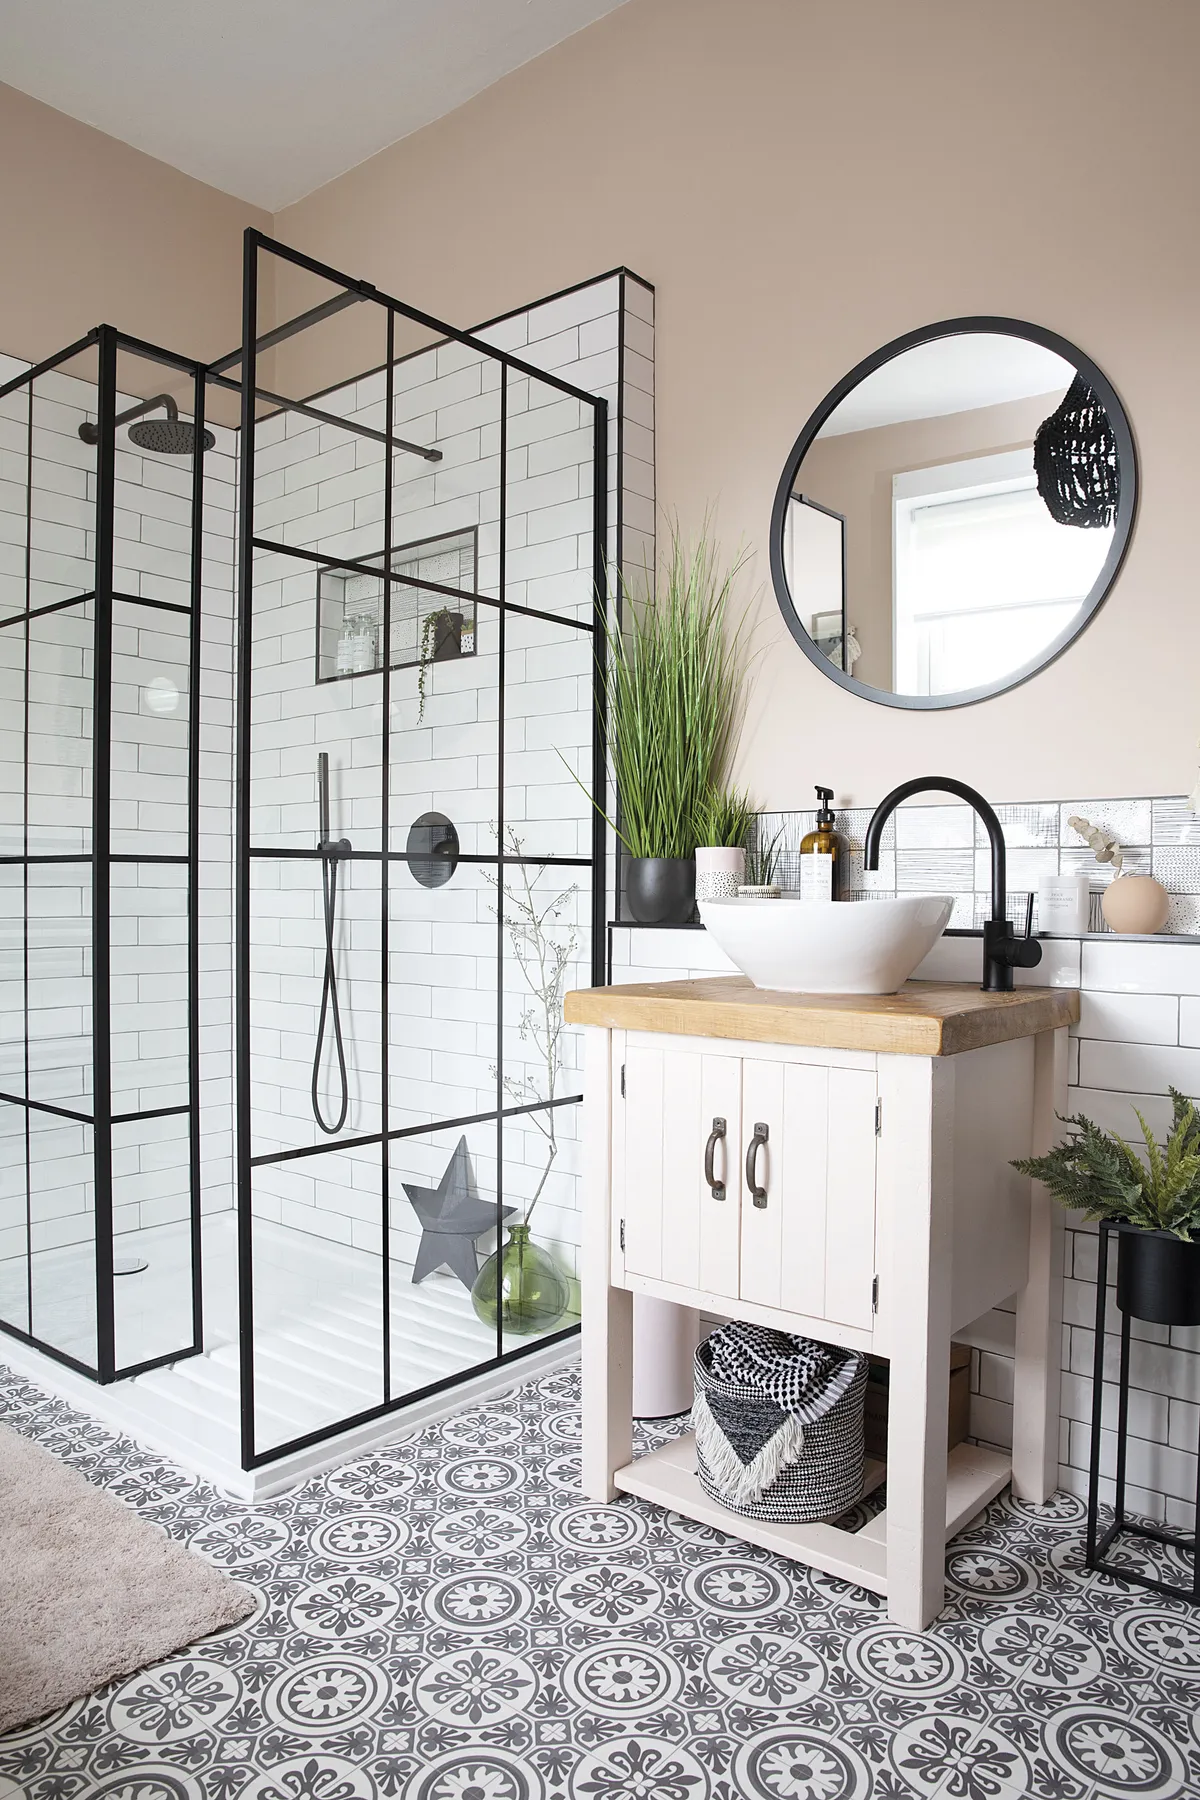 A false wall was built out so Liz could have an inset shelf in the shower and a ledge behind the sink for toiletries. The bold black beaded chandelier – just seen in the mirror – pulls the room’s scheme together